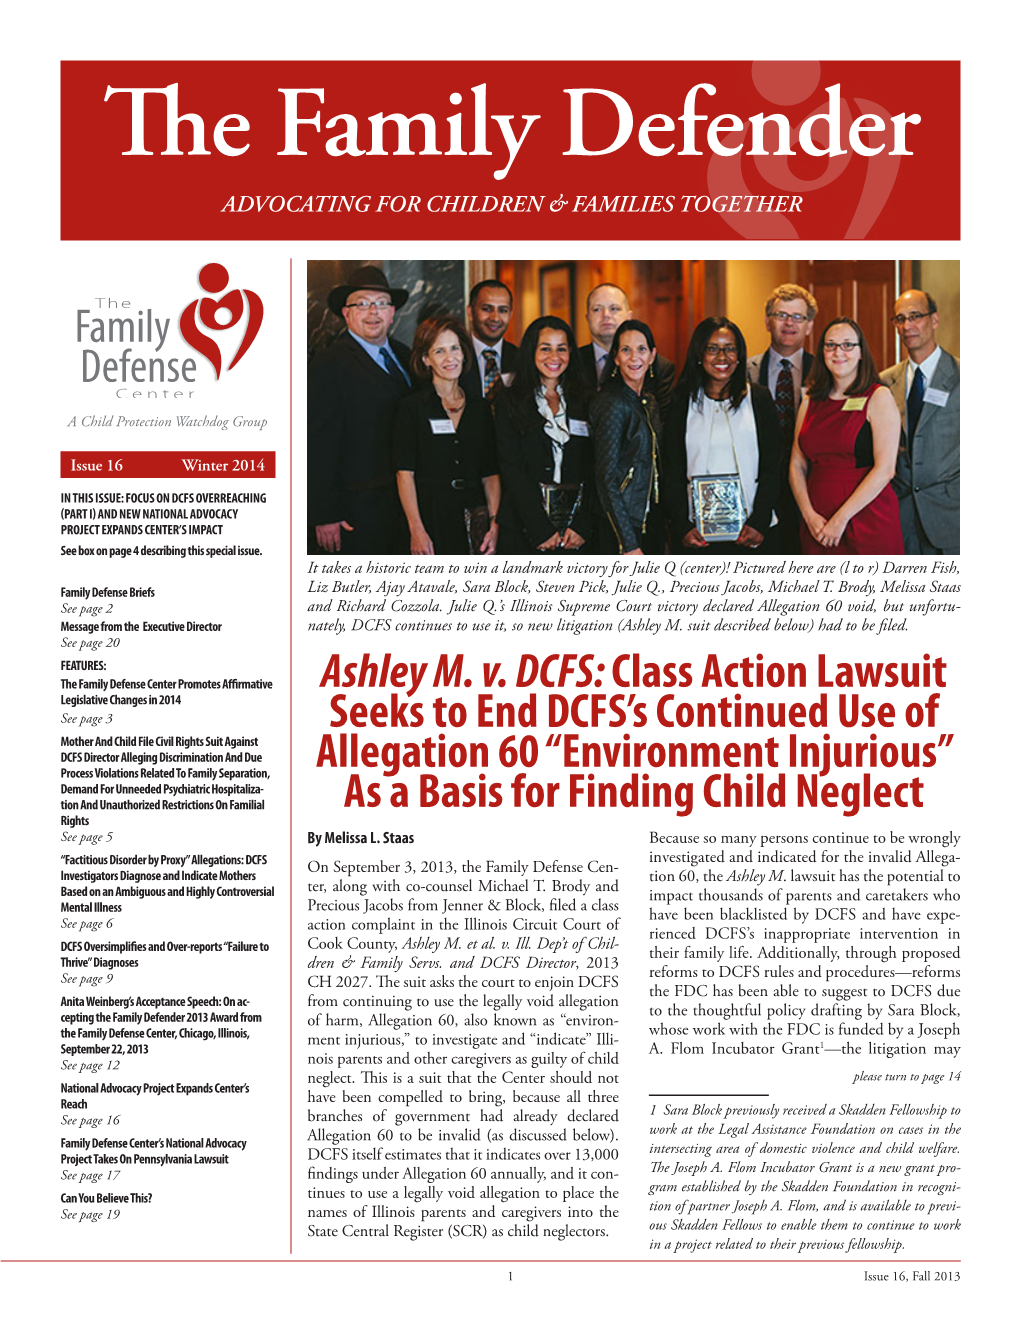 The Family Defender, Issue 16, Winter 2014